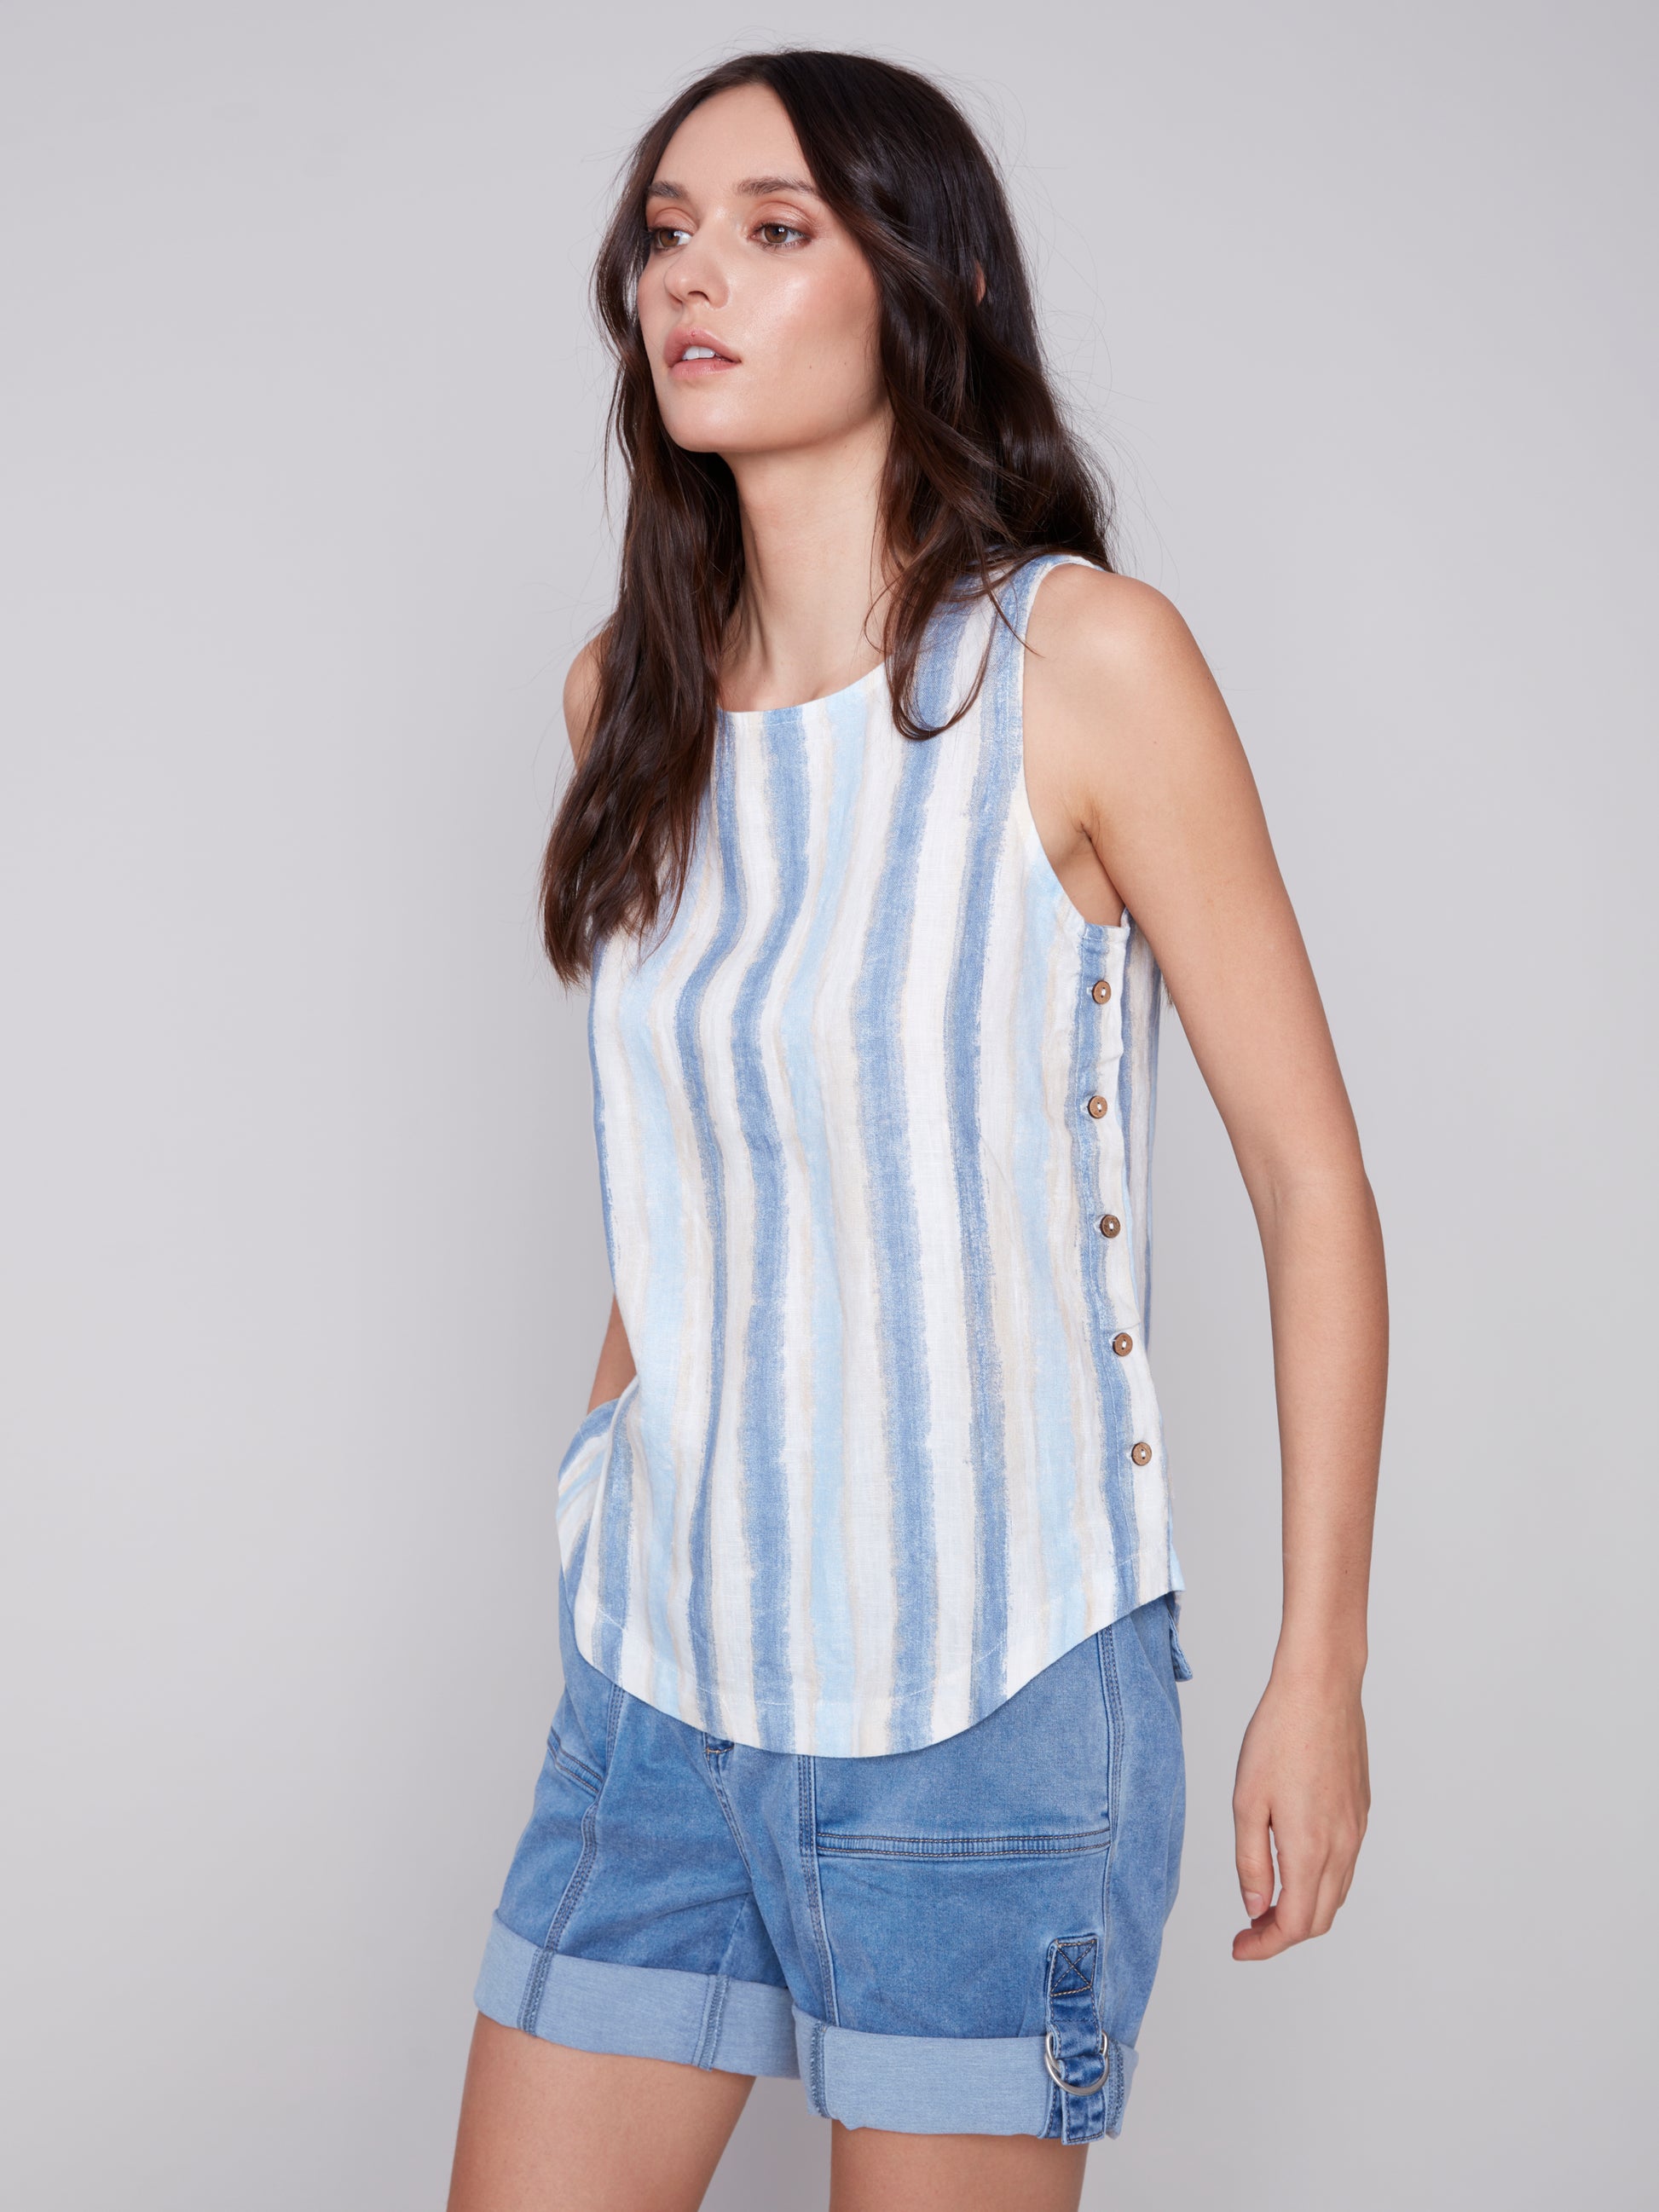 The model is wearing a stylish Charlie B Linen Top with Side Buttons in blue stripes.